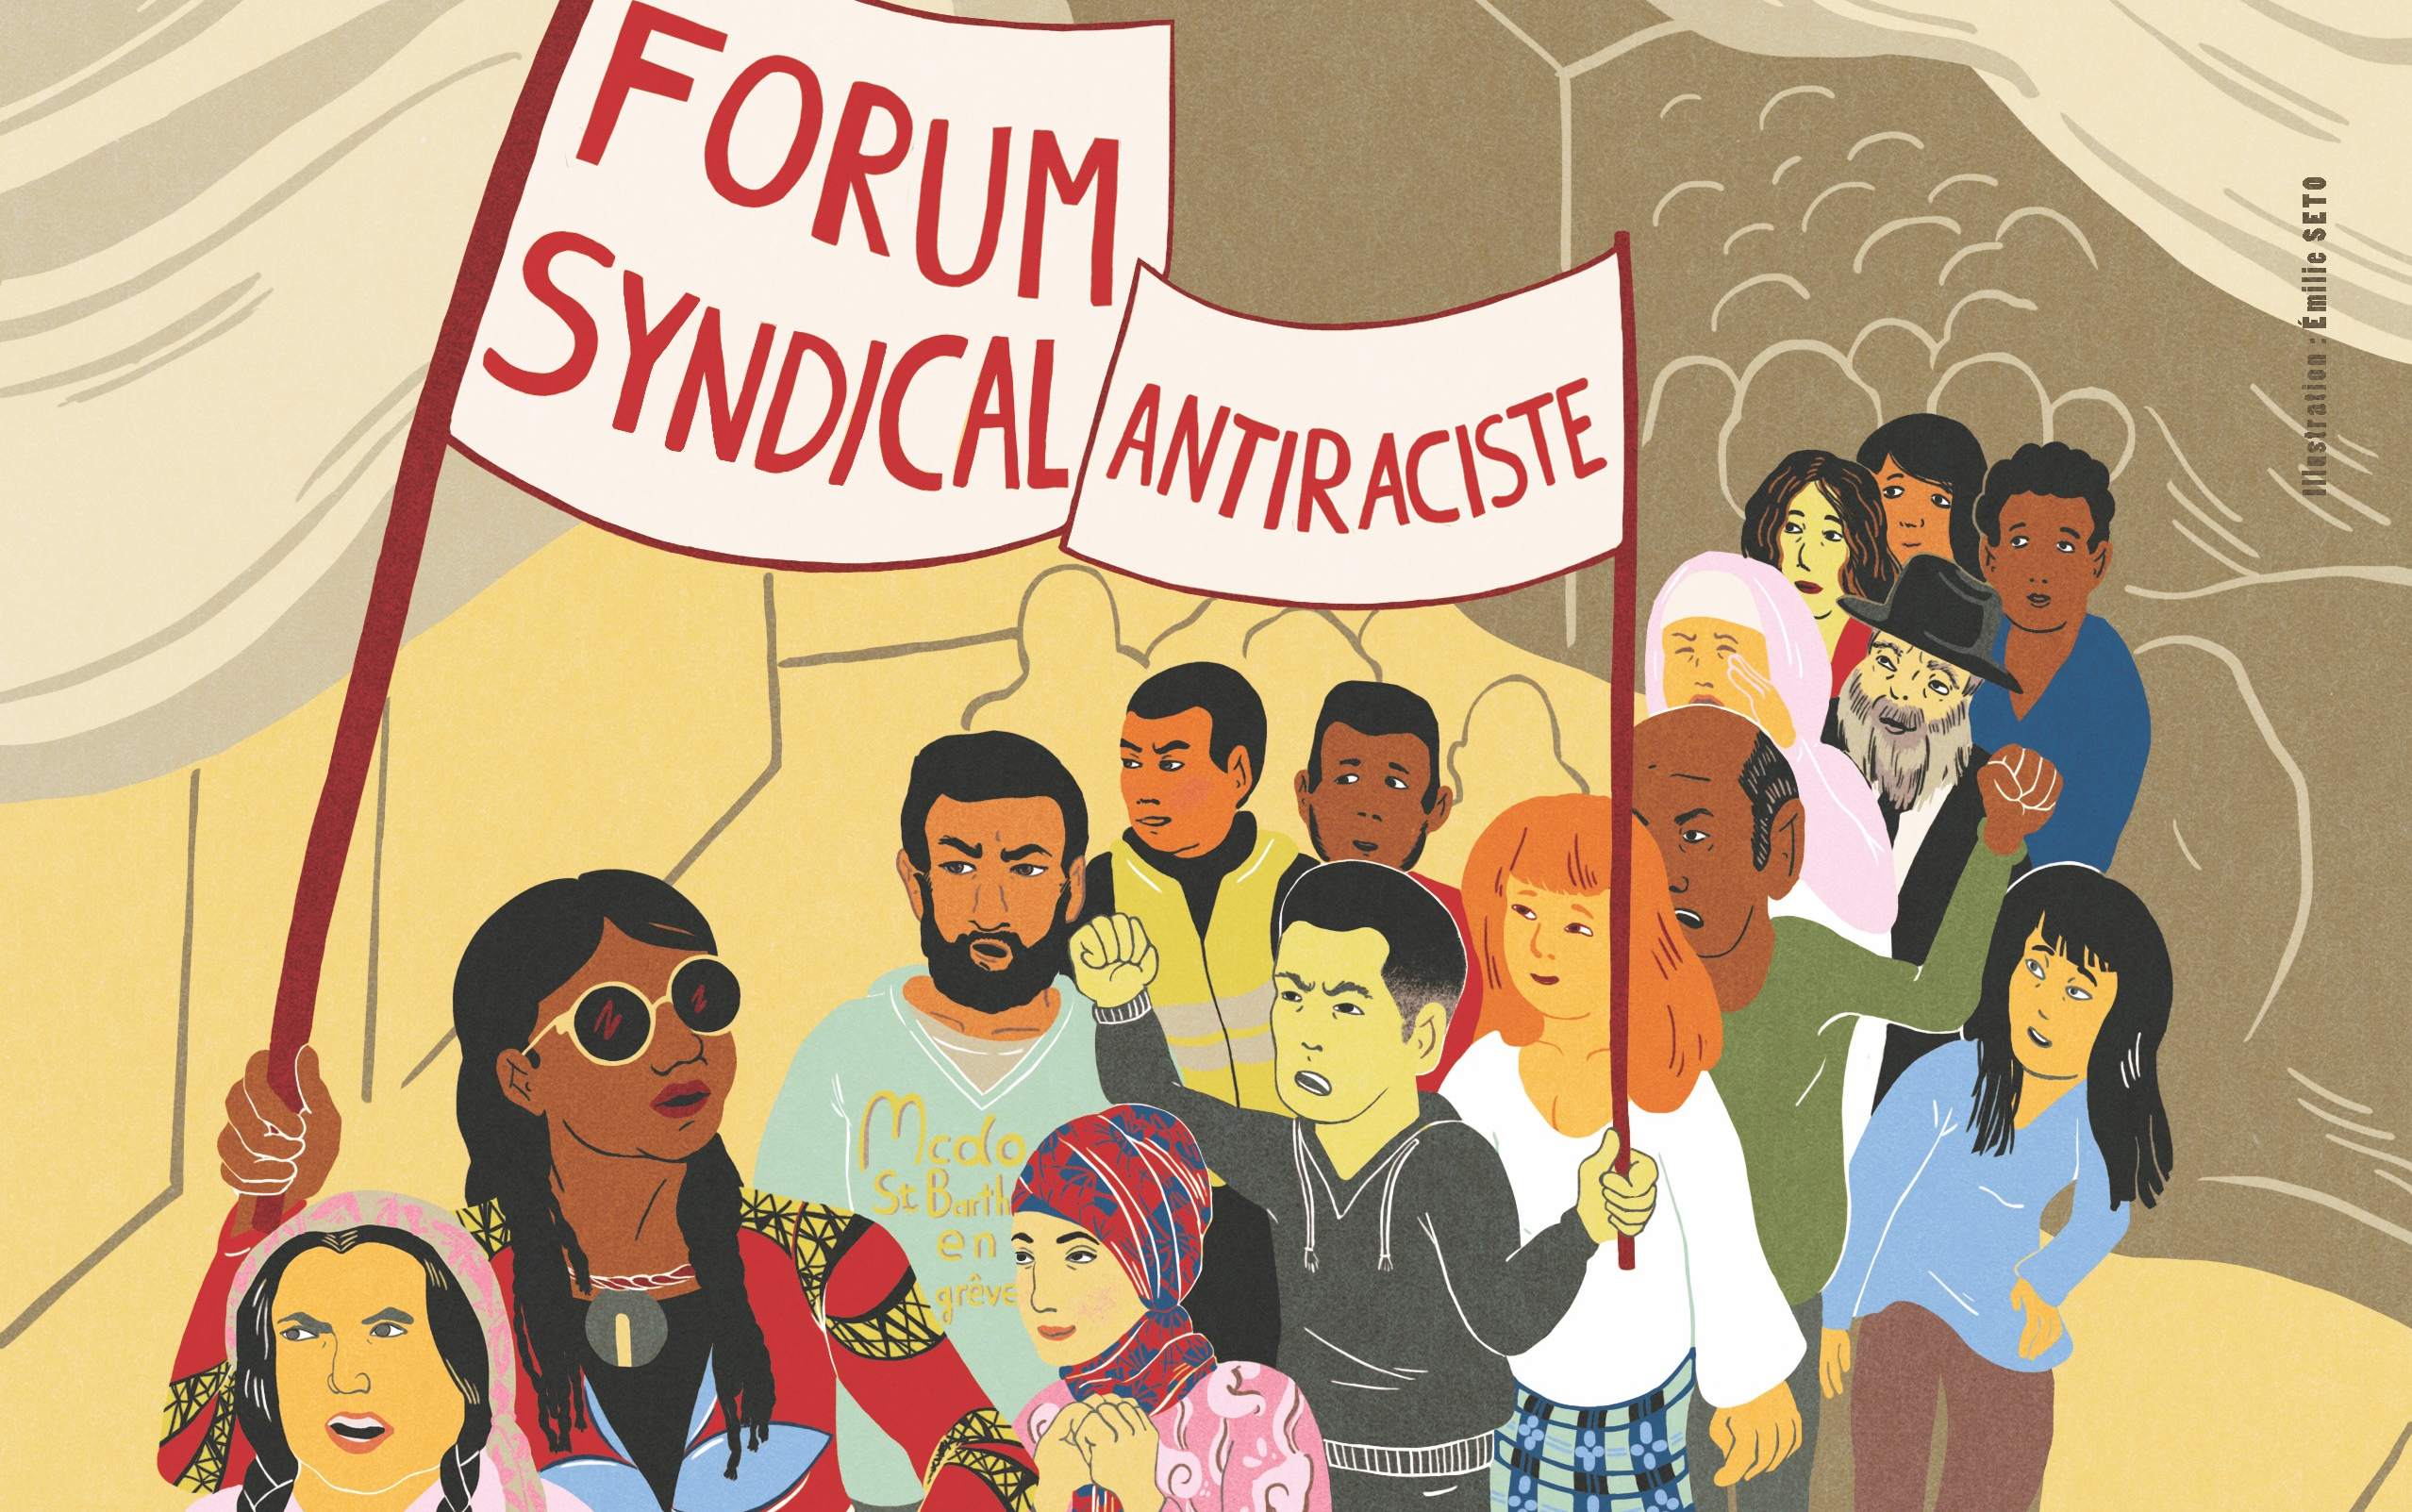 forum syndicale antiraciste